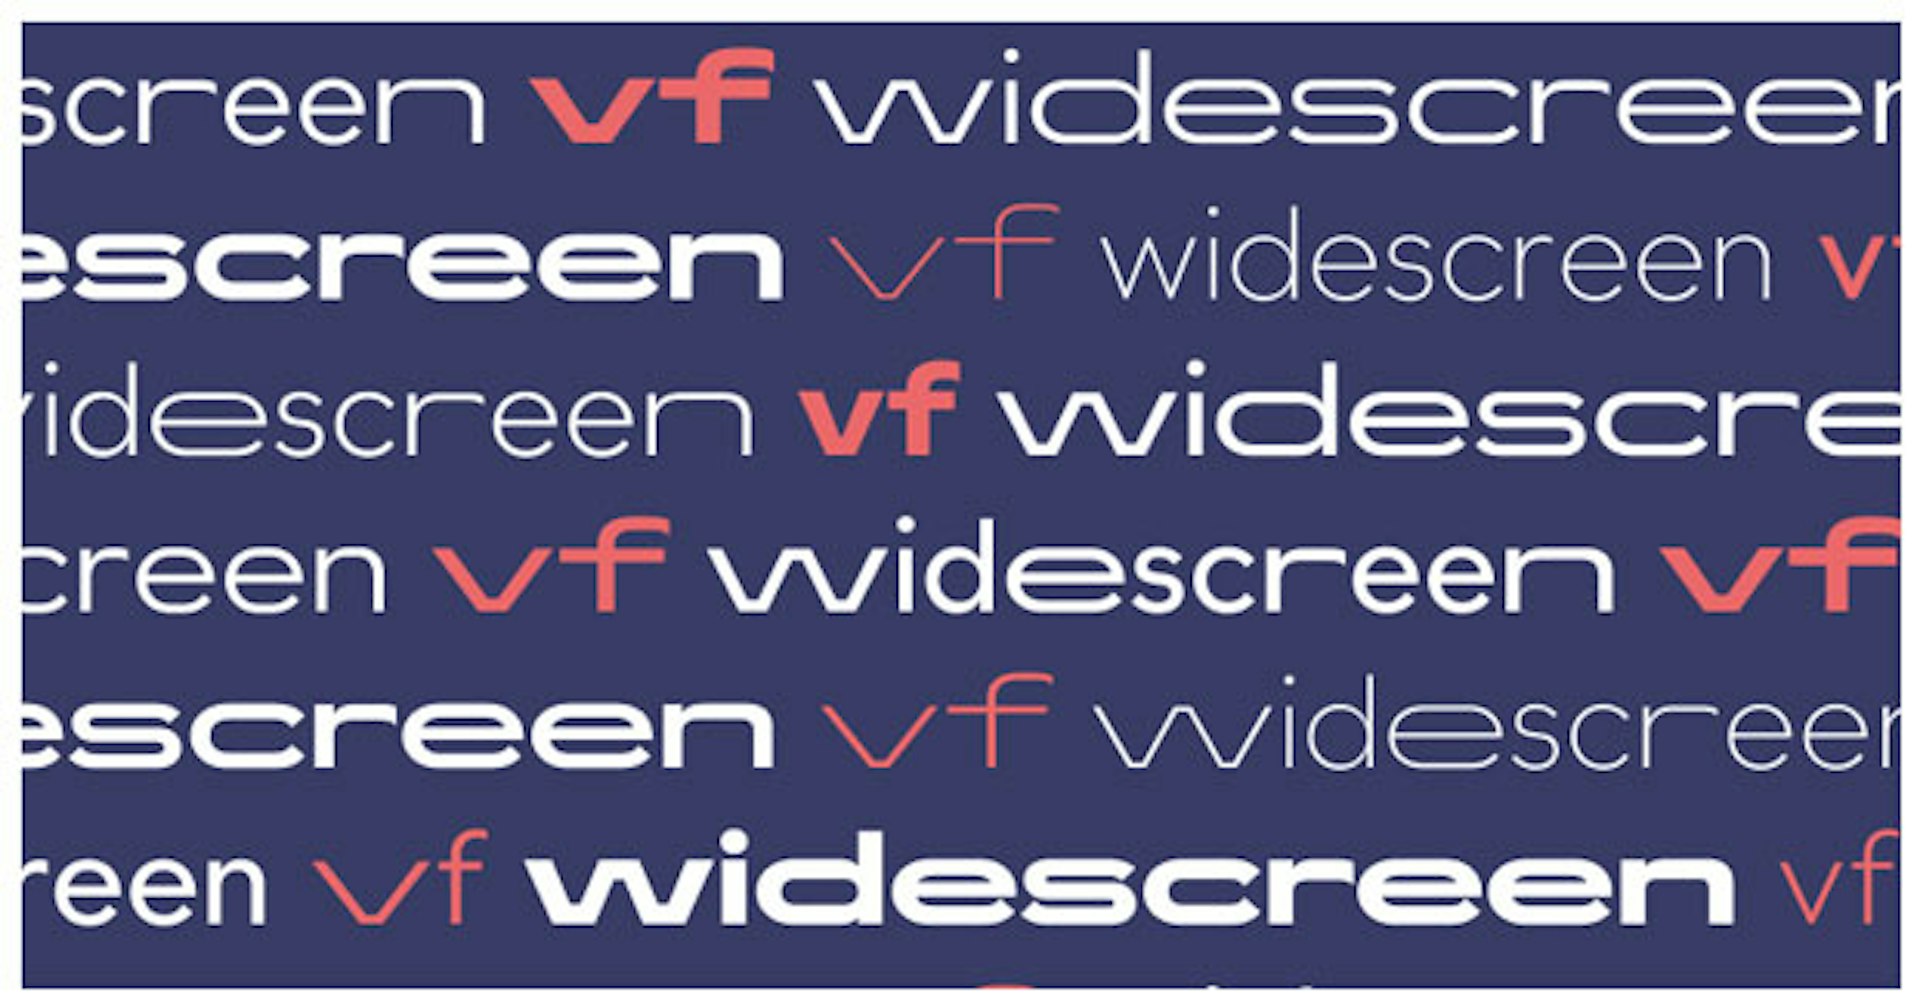 Black and white demo of Widescreen VF mixed character widths